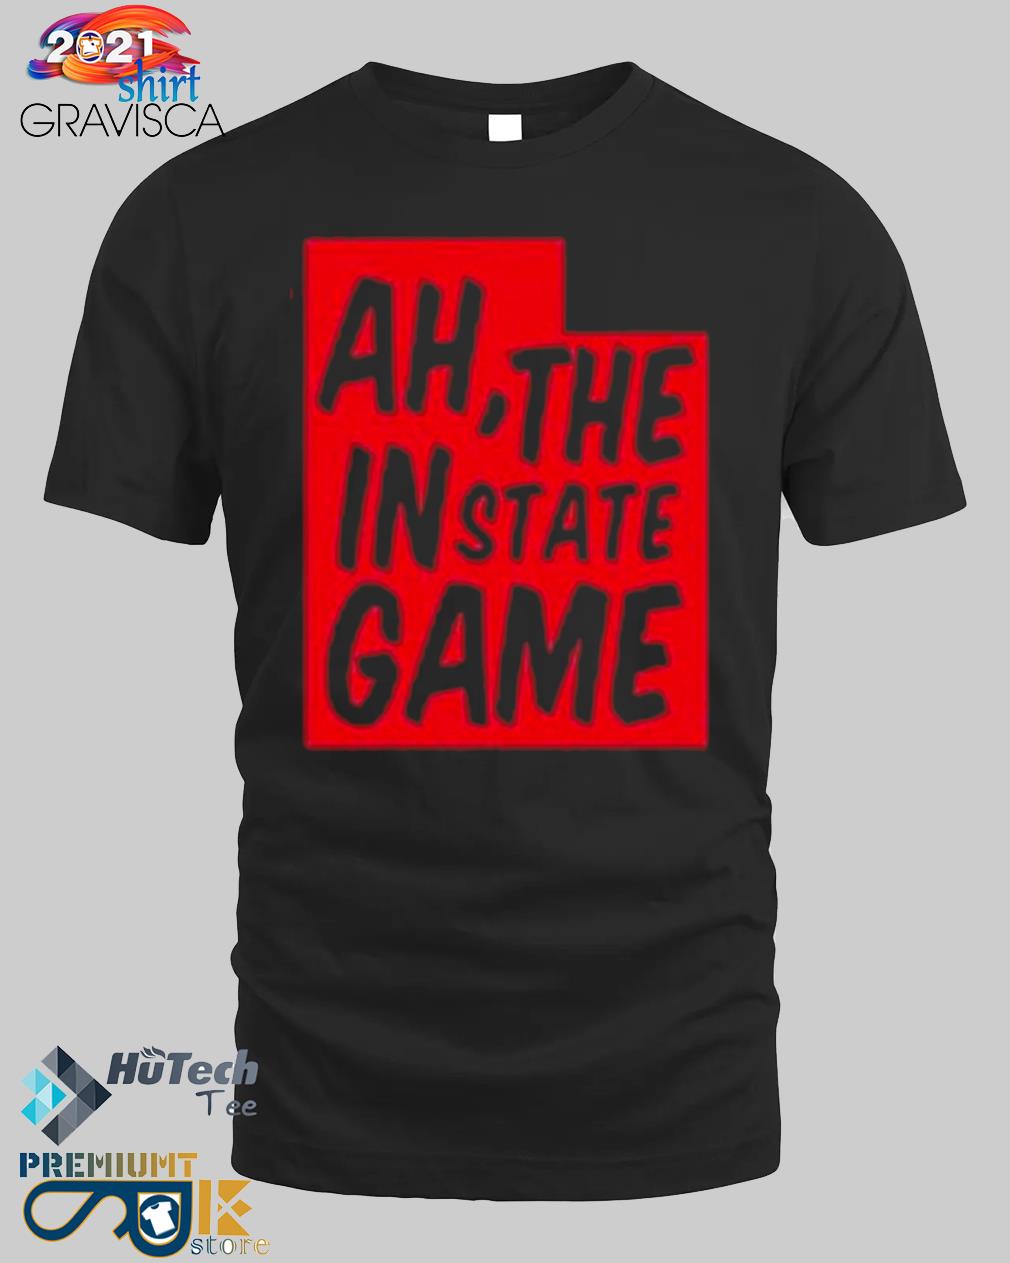 Ah…the instate game shirt